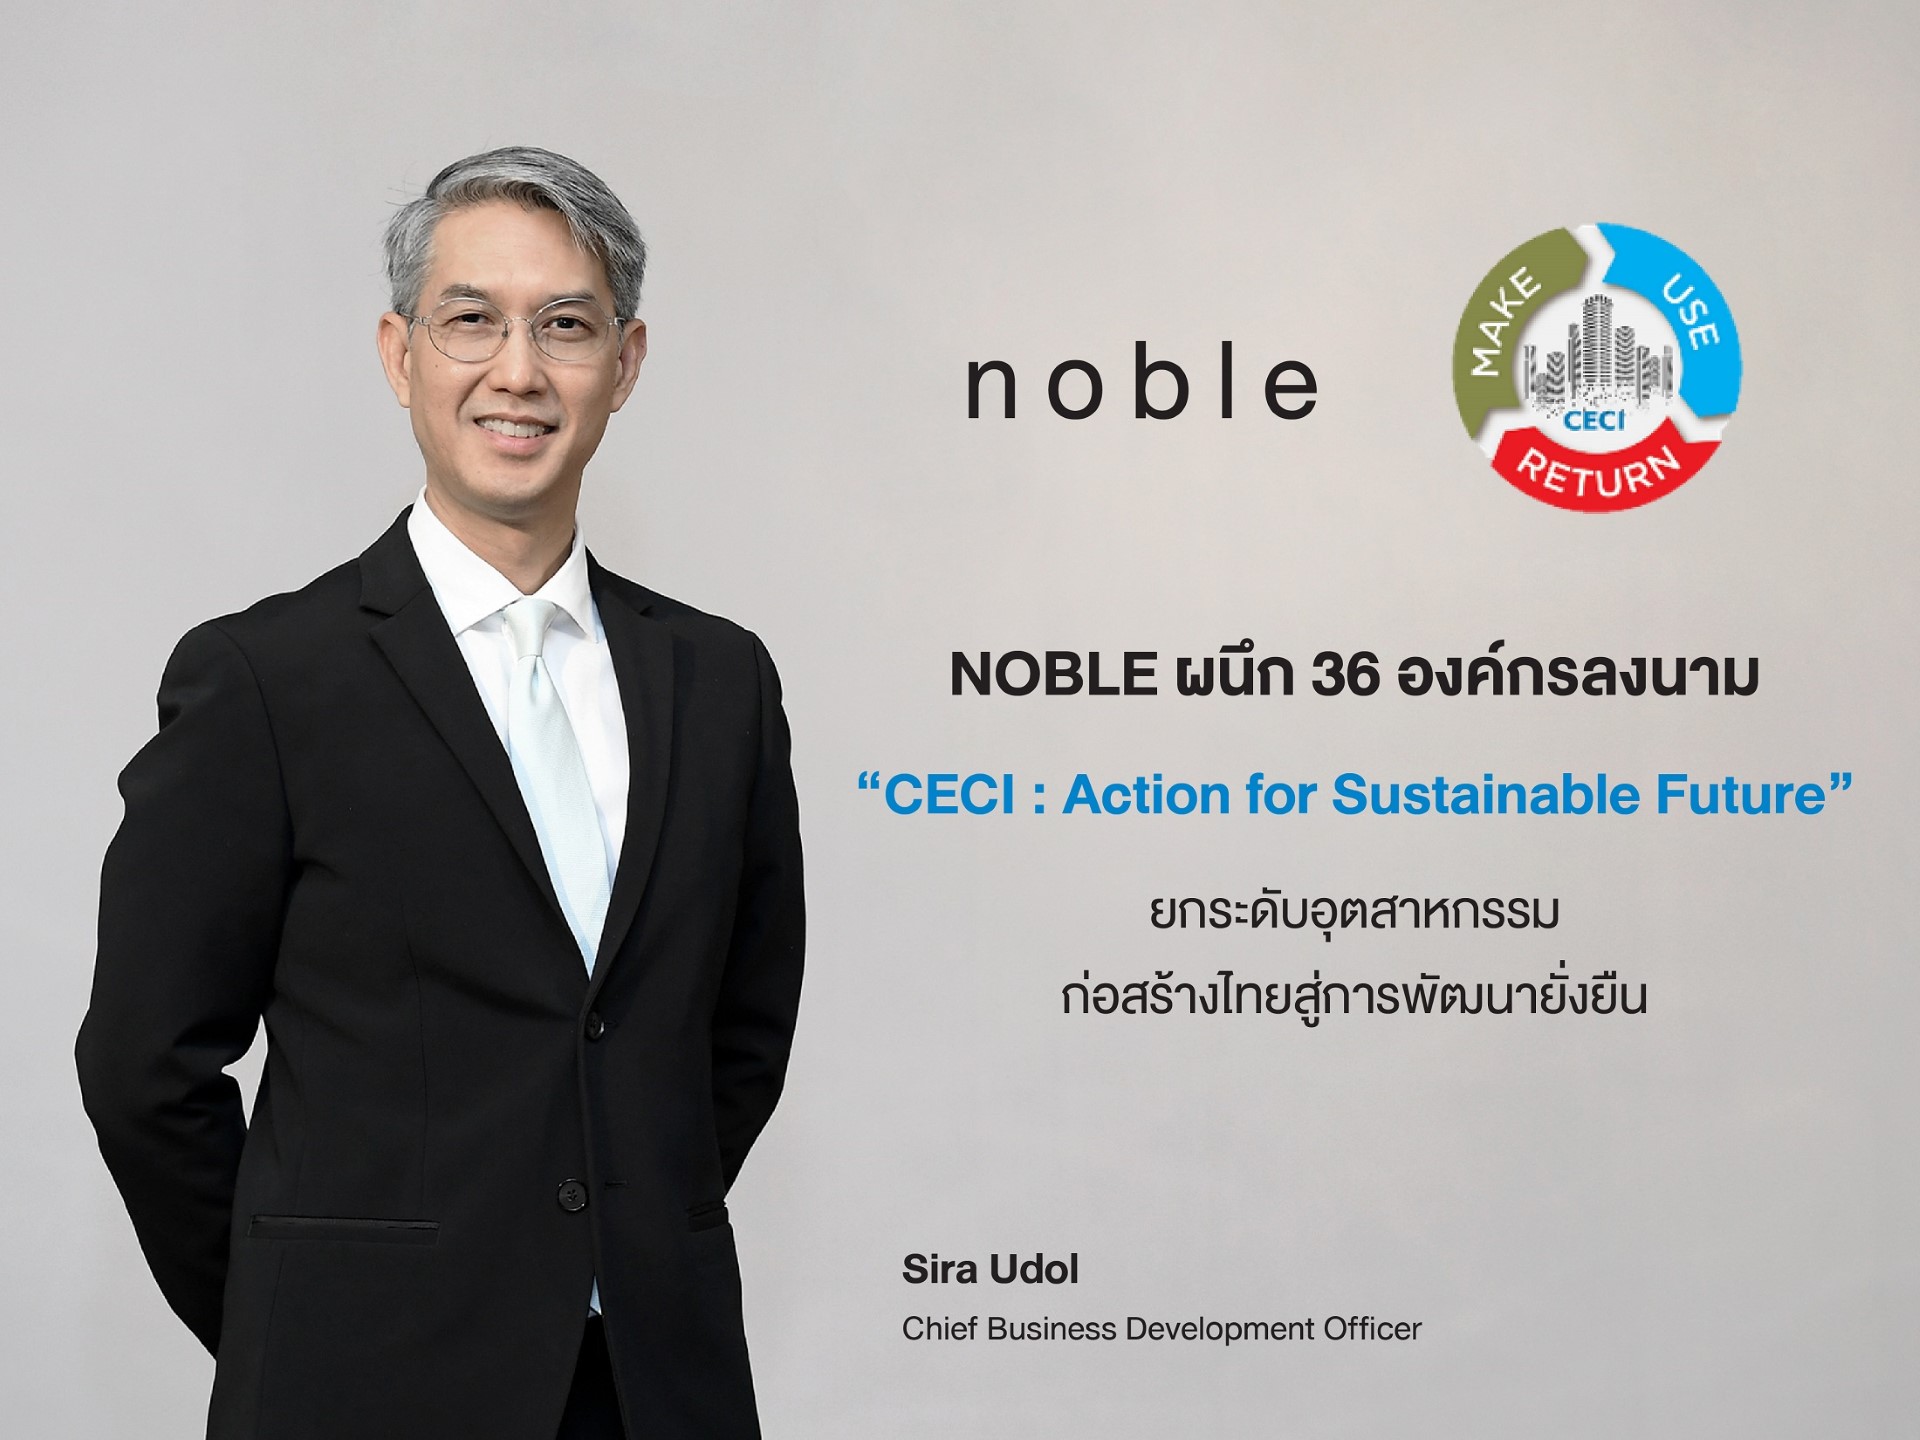 NOBLE ผนึก 36 องค์กร ลงนาม “CECI : Action for Sustainable Future”